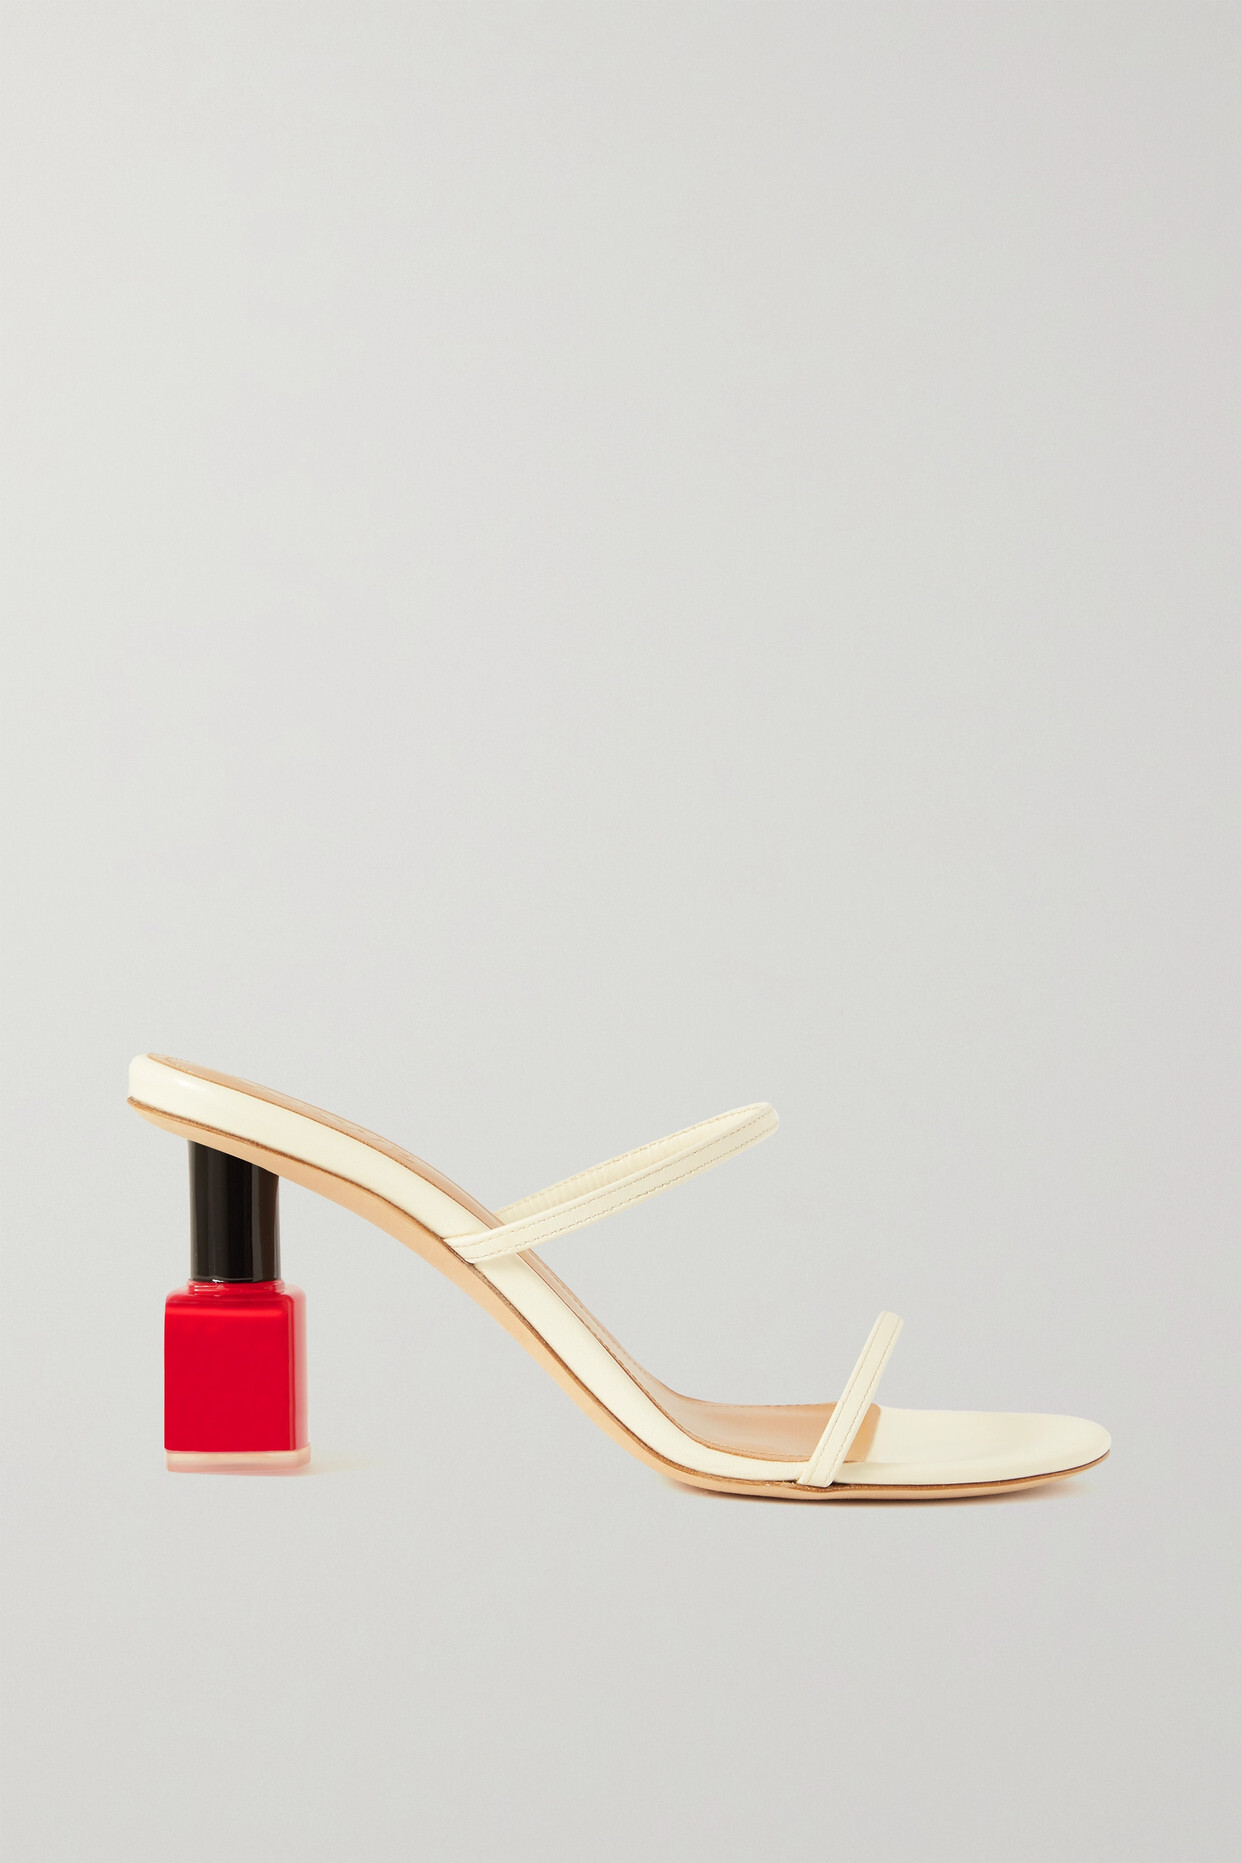 Loewe - Leather Mules - Red